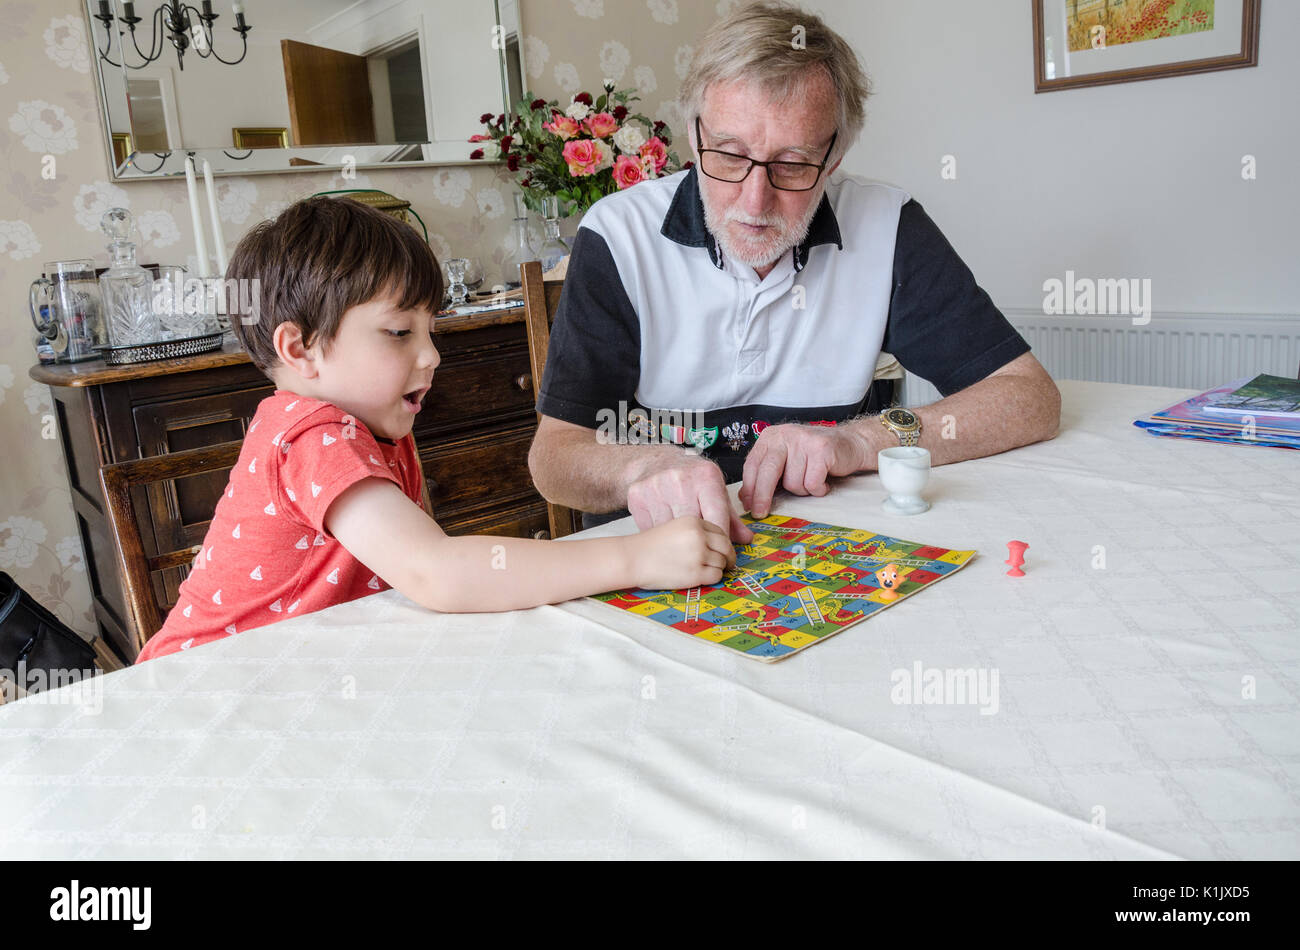 A young boy plays snakes and ladders with his grandfather on the dining room table. Stock Photo